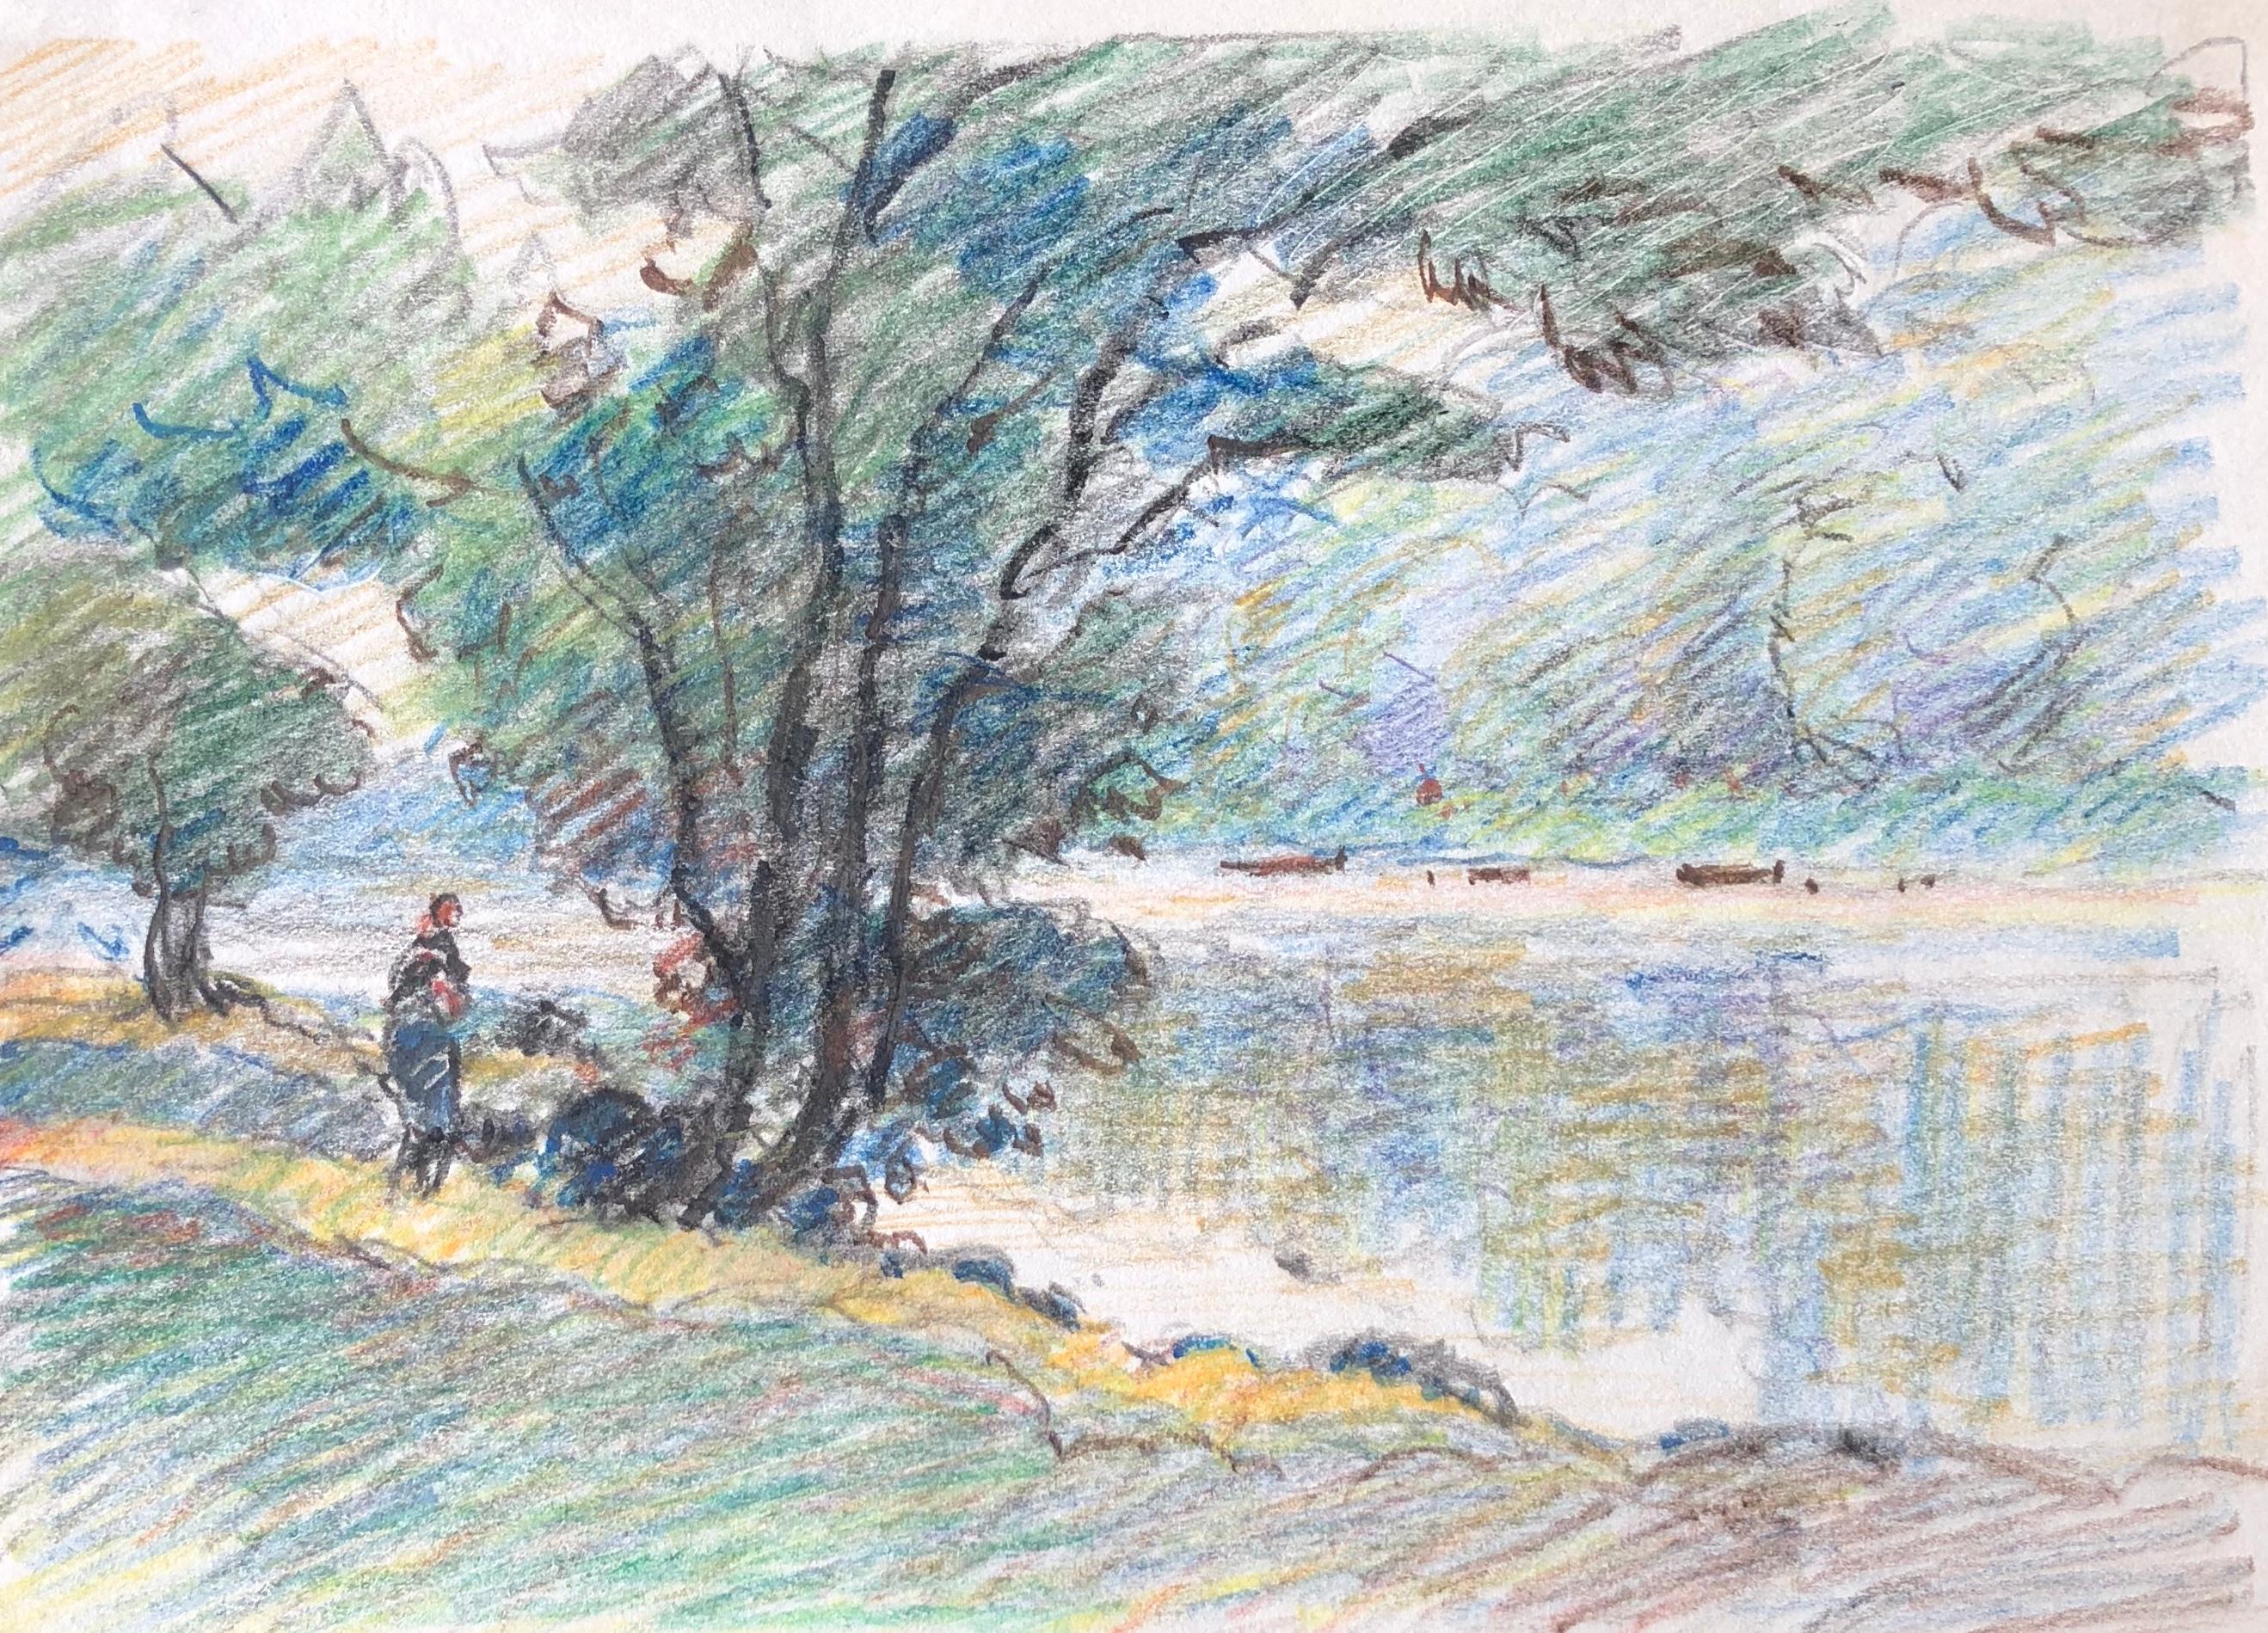 Camille Meriot Landscape Painting - Fisherman by Lake, French Impressionist painting